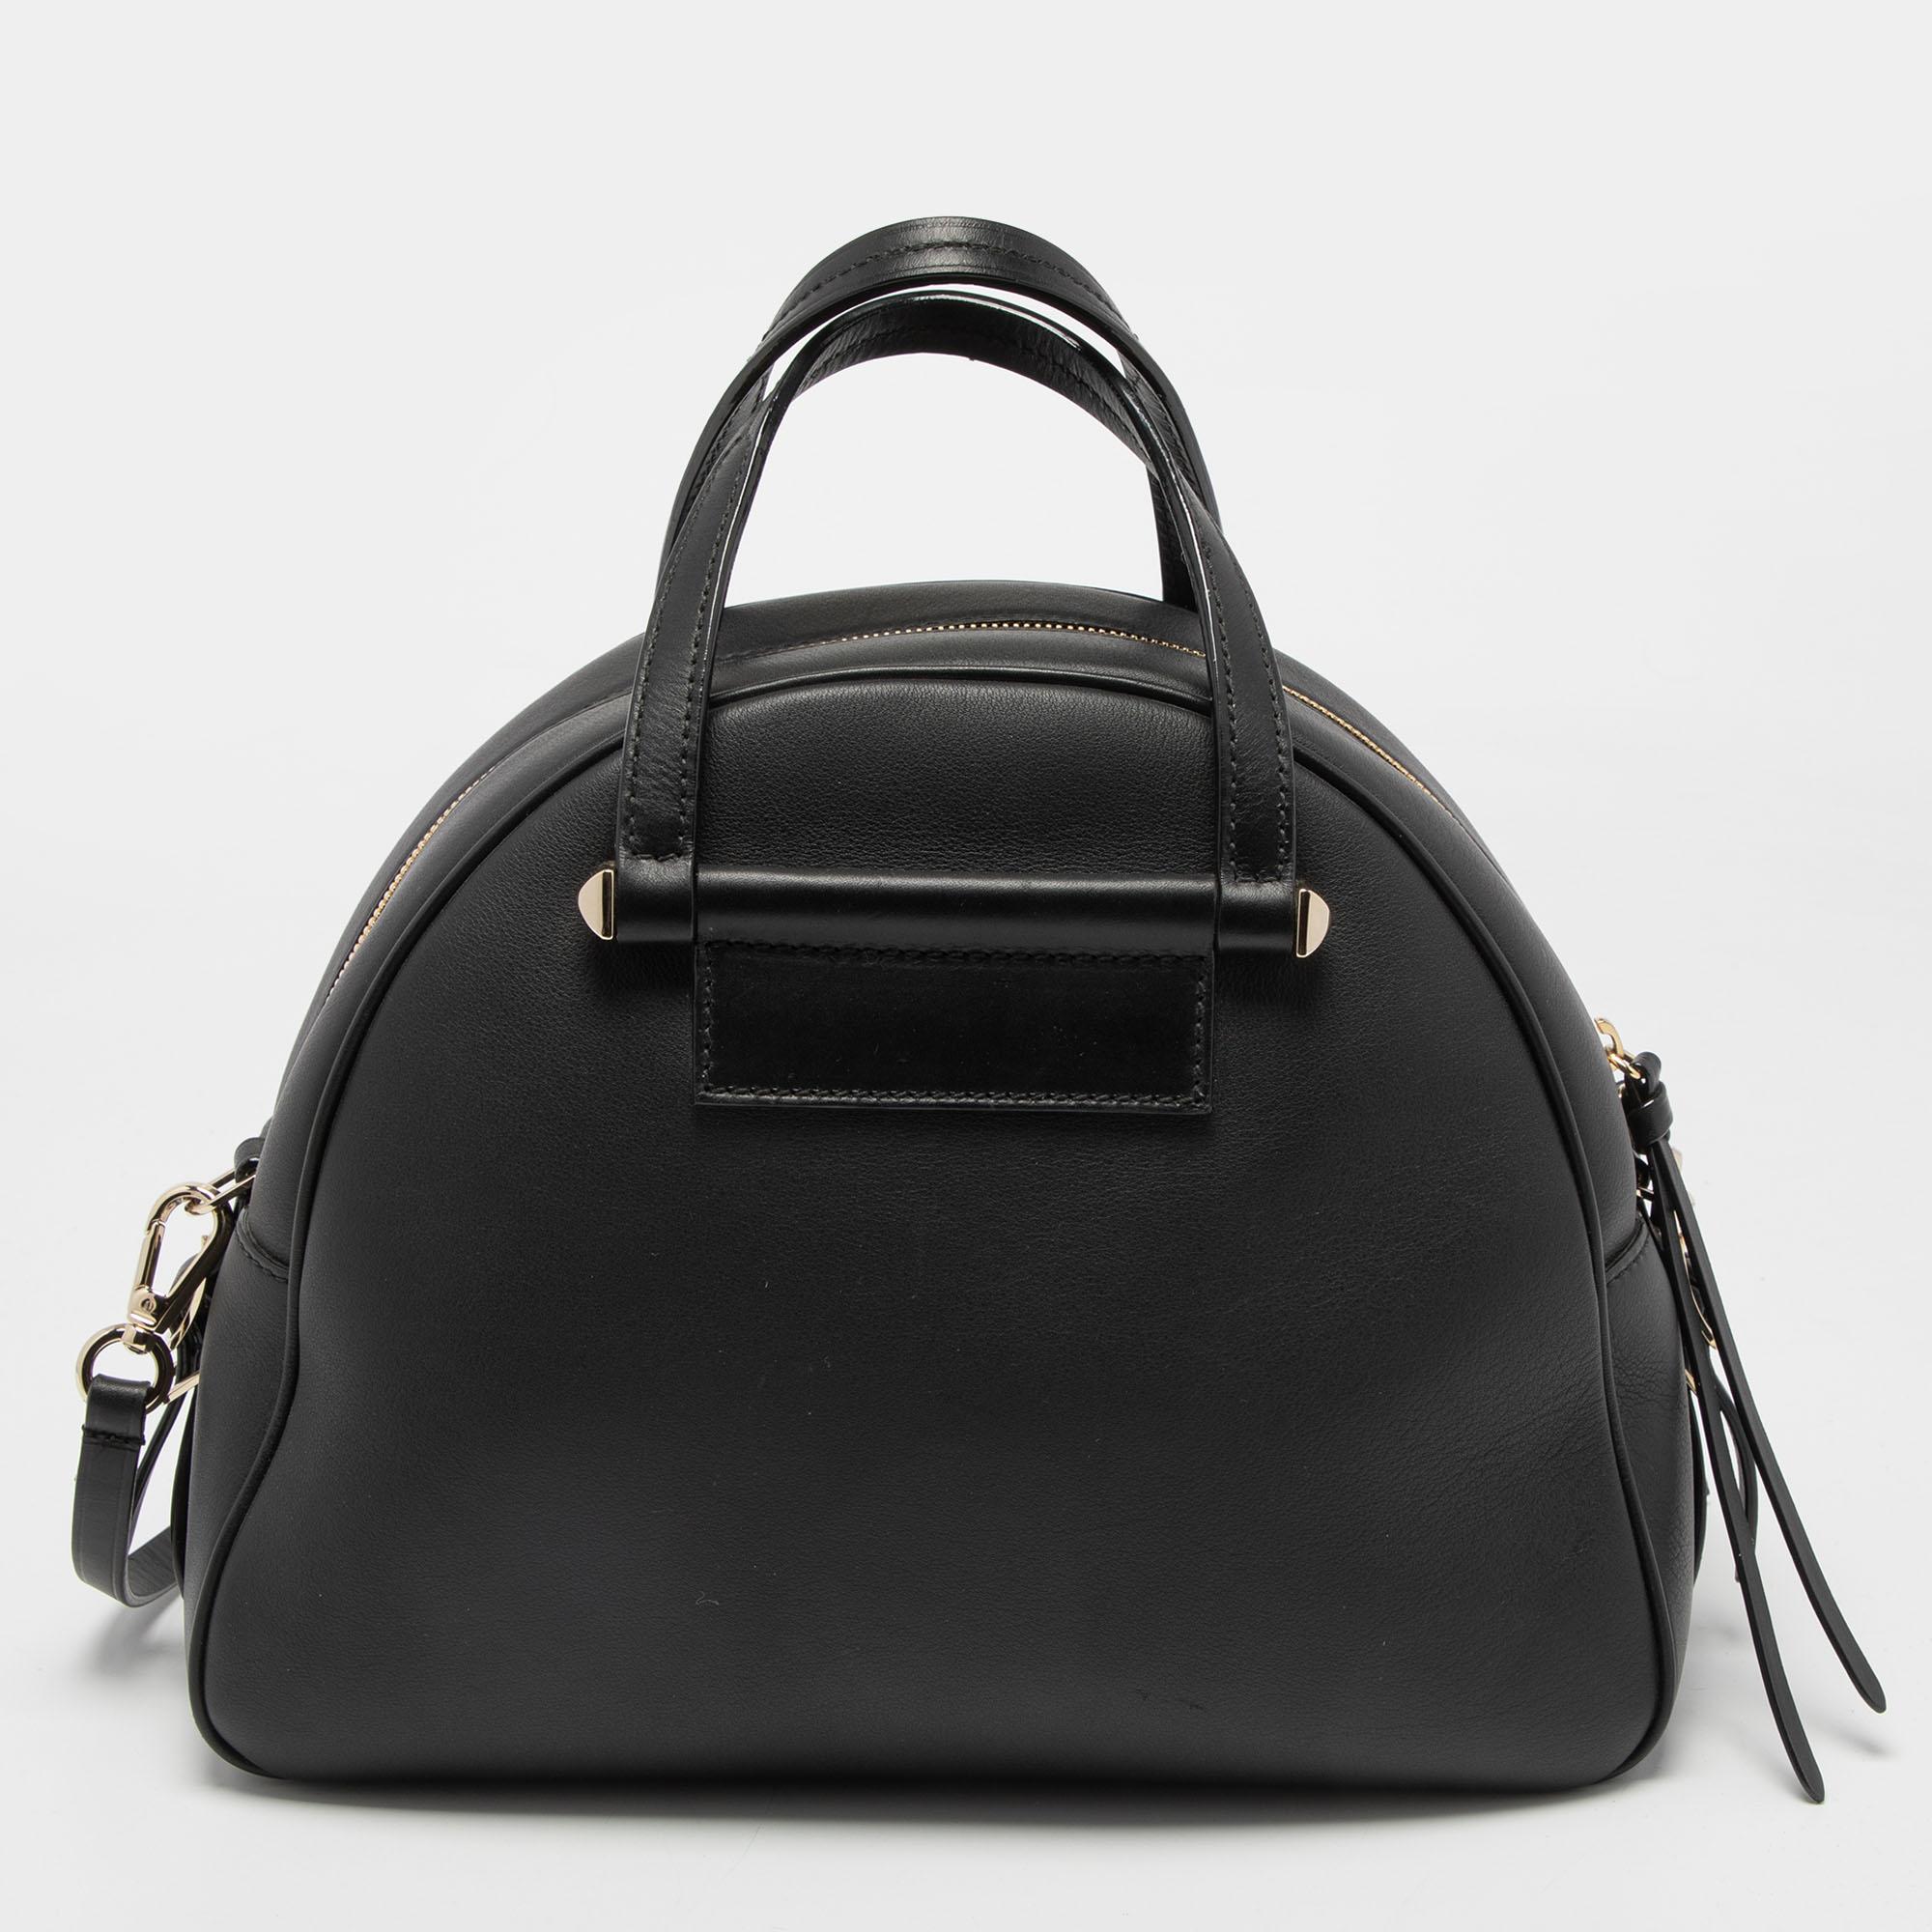 Luxuriously crafted, this Jimmy Choo Varenne Bowler bag is splendid to look at and flaunt this season. It has been crafted from black leather and features dual handles, gold-tone 'JC' logo and buckle strap details on the front, and a top zip